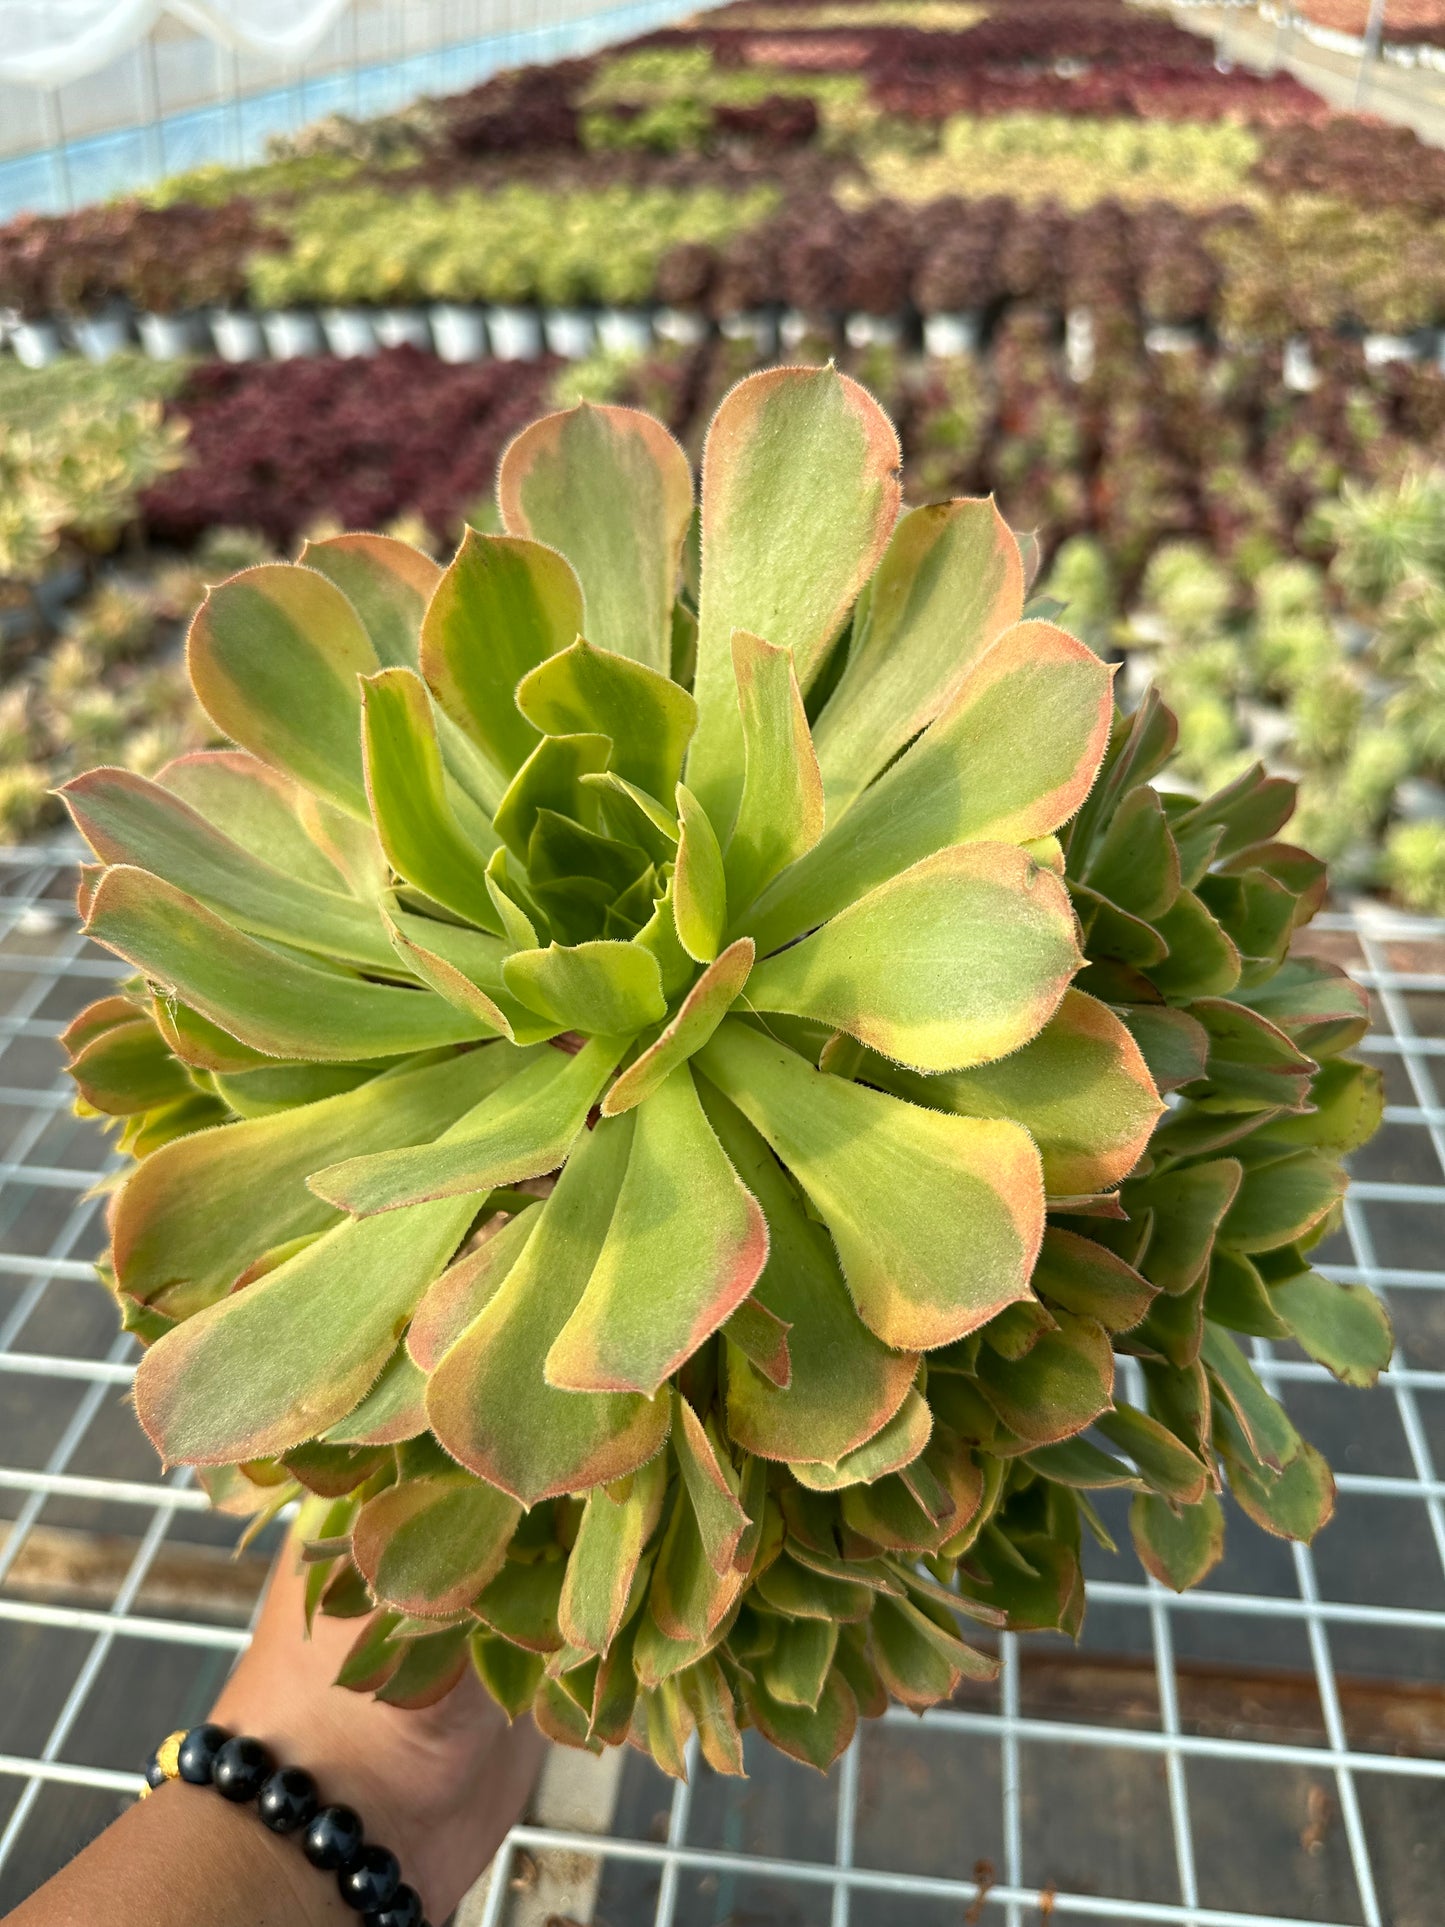 Blushing Beauty Variegata cluster20-30cm Old pile/ 10-20 heads/ Aeonium cluster / Variegated Natural Live Plants Succulents